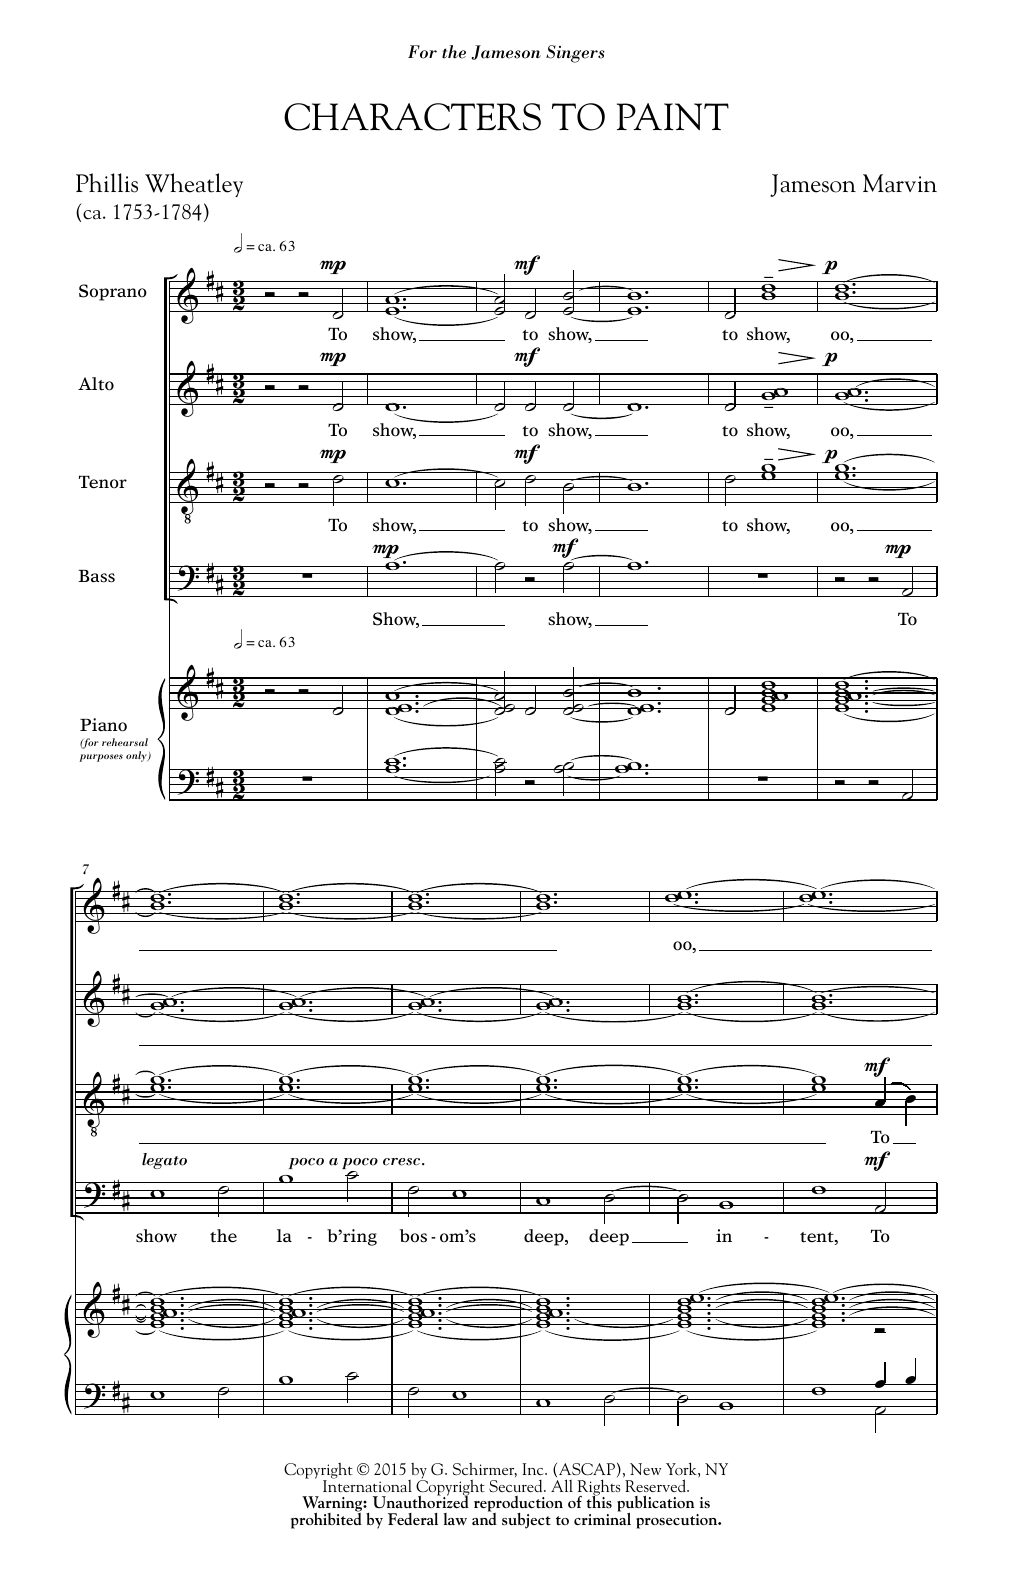 Download Jameson Marvin Characters To Paint Sheet Music